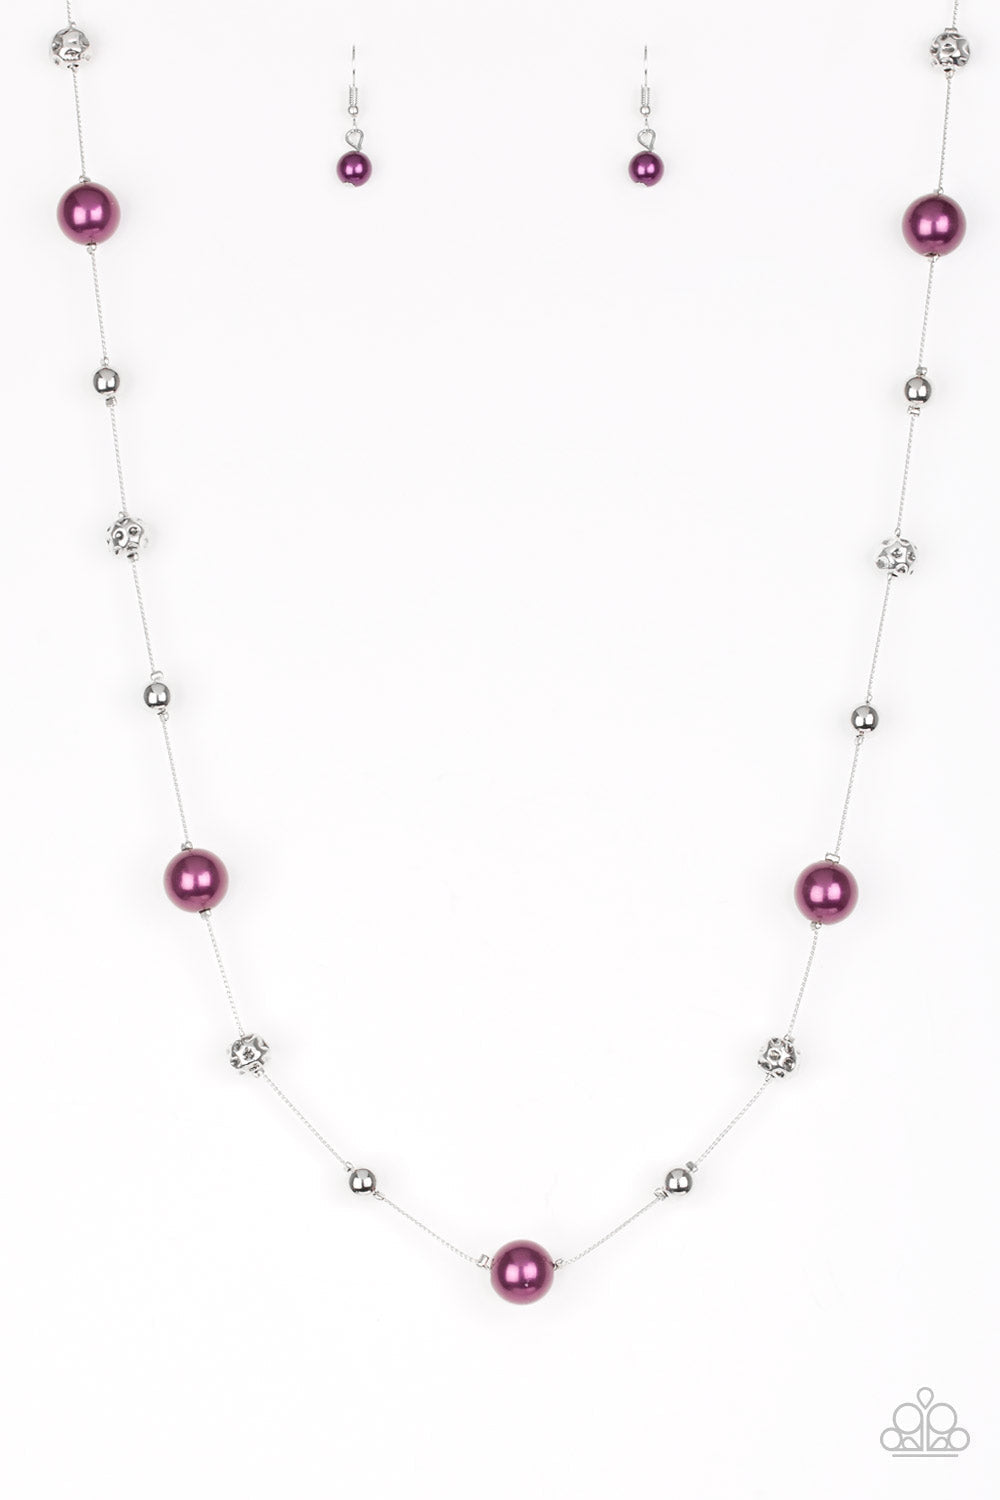 Eloquently Eloquent - Purple and Silver Necklace - Paparazzi Accessories - Infused with pearly purple accents, classic silver and delicately hammered silver beads trickle along an elegantly elongated silver chain for a refined stylish necklace. Bejeweled Accessories By Kristie 